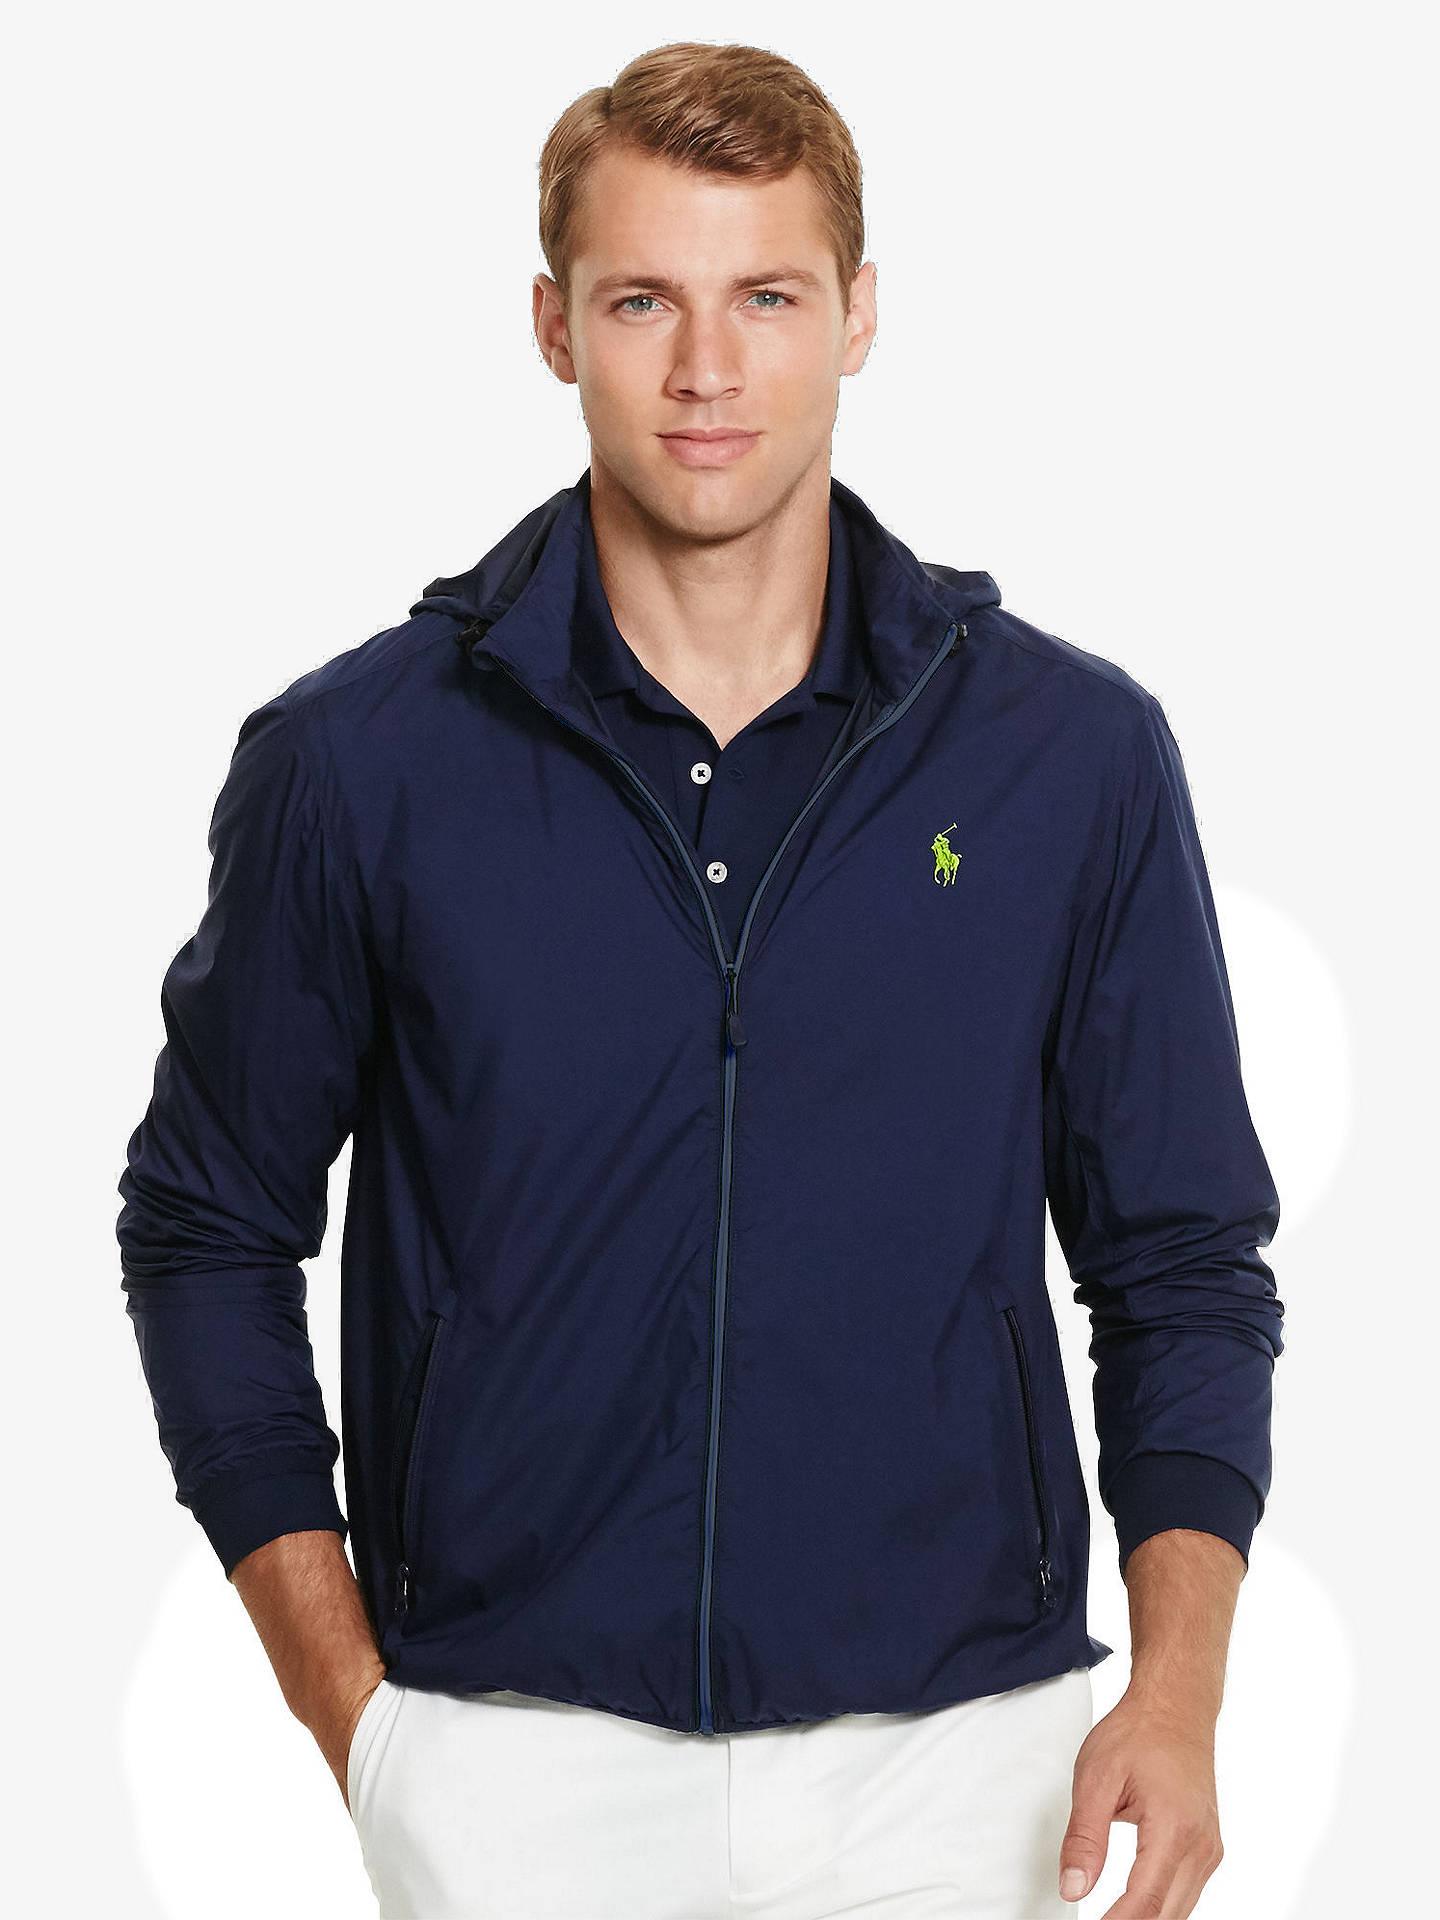 Polo Golf by Ralph Lauren Packable Performance Water-Resistant Jacket,  French Navy at John Lewis & Partners